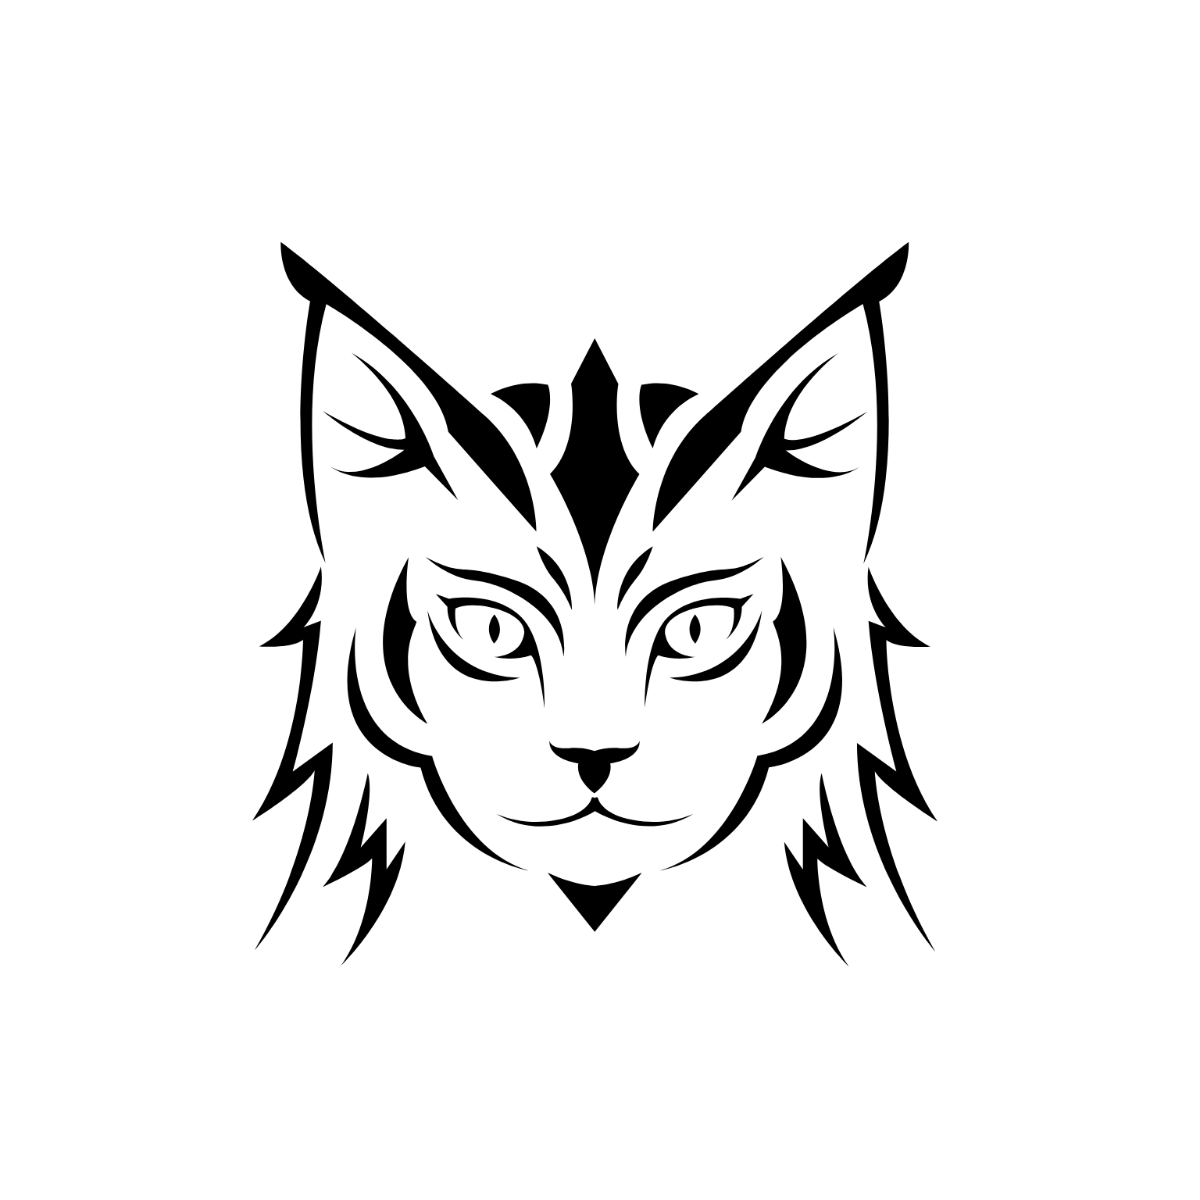 Free Tribal Cat Vector Template